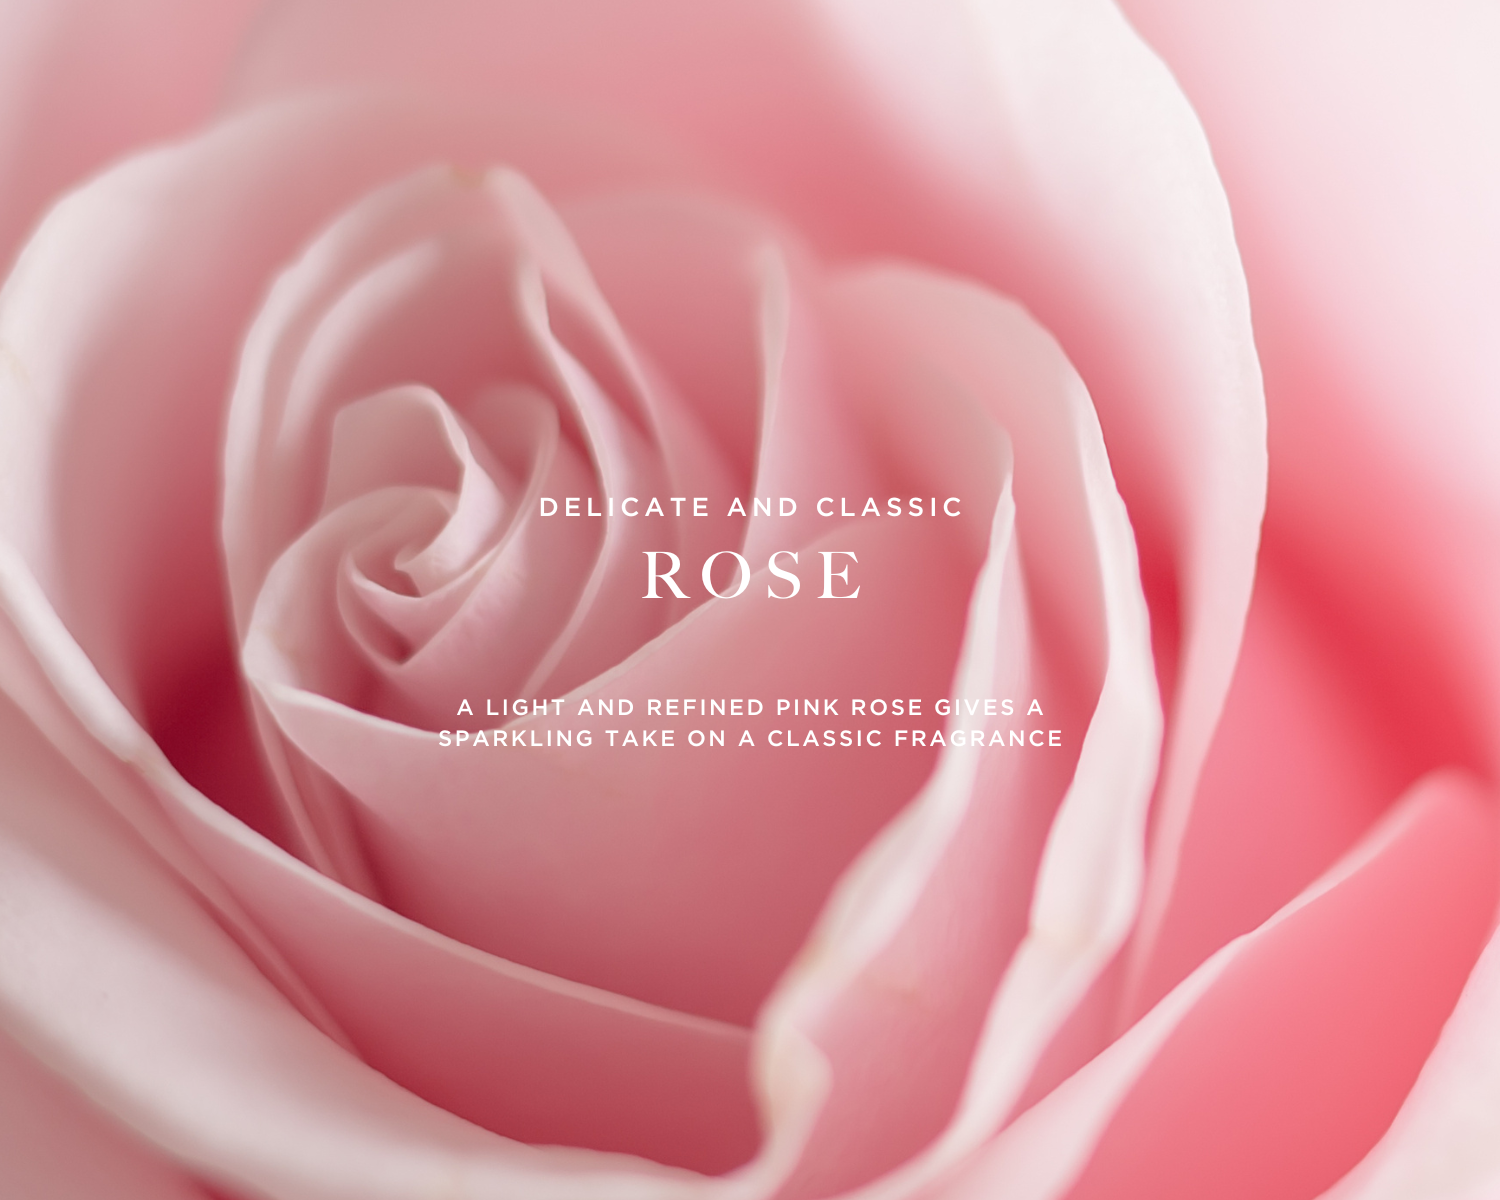 Caswell-Massey Rose Perfume for Women: image showing pink roses to represent primary scent note